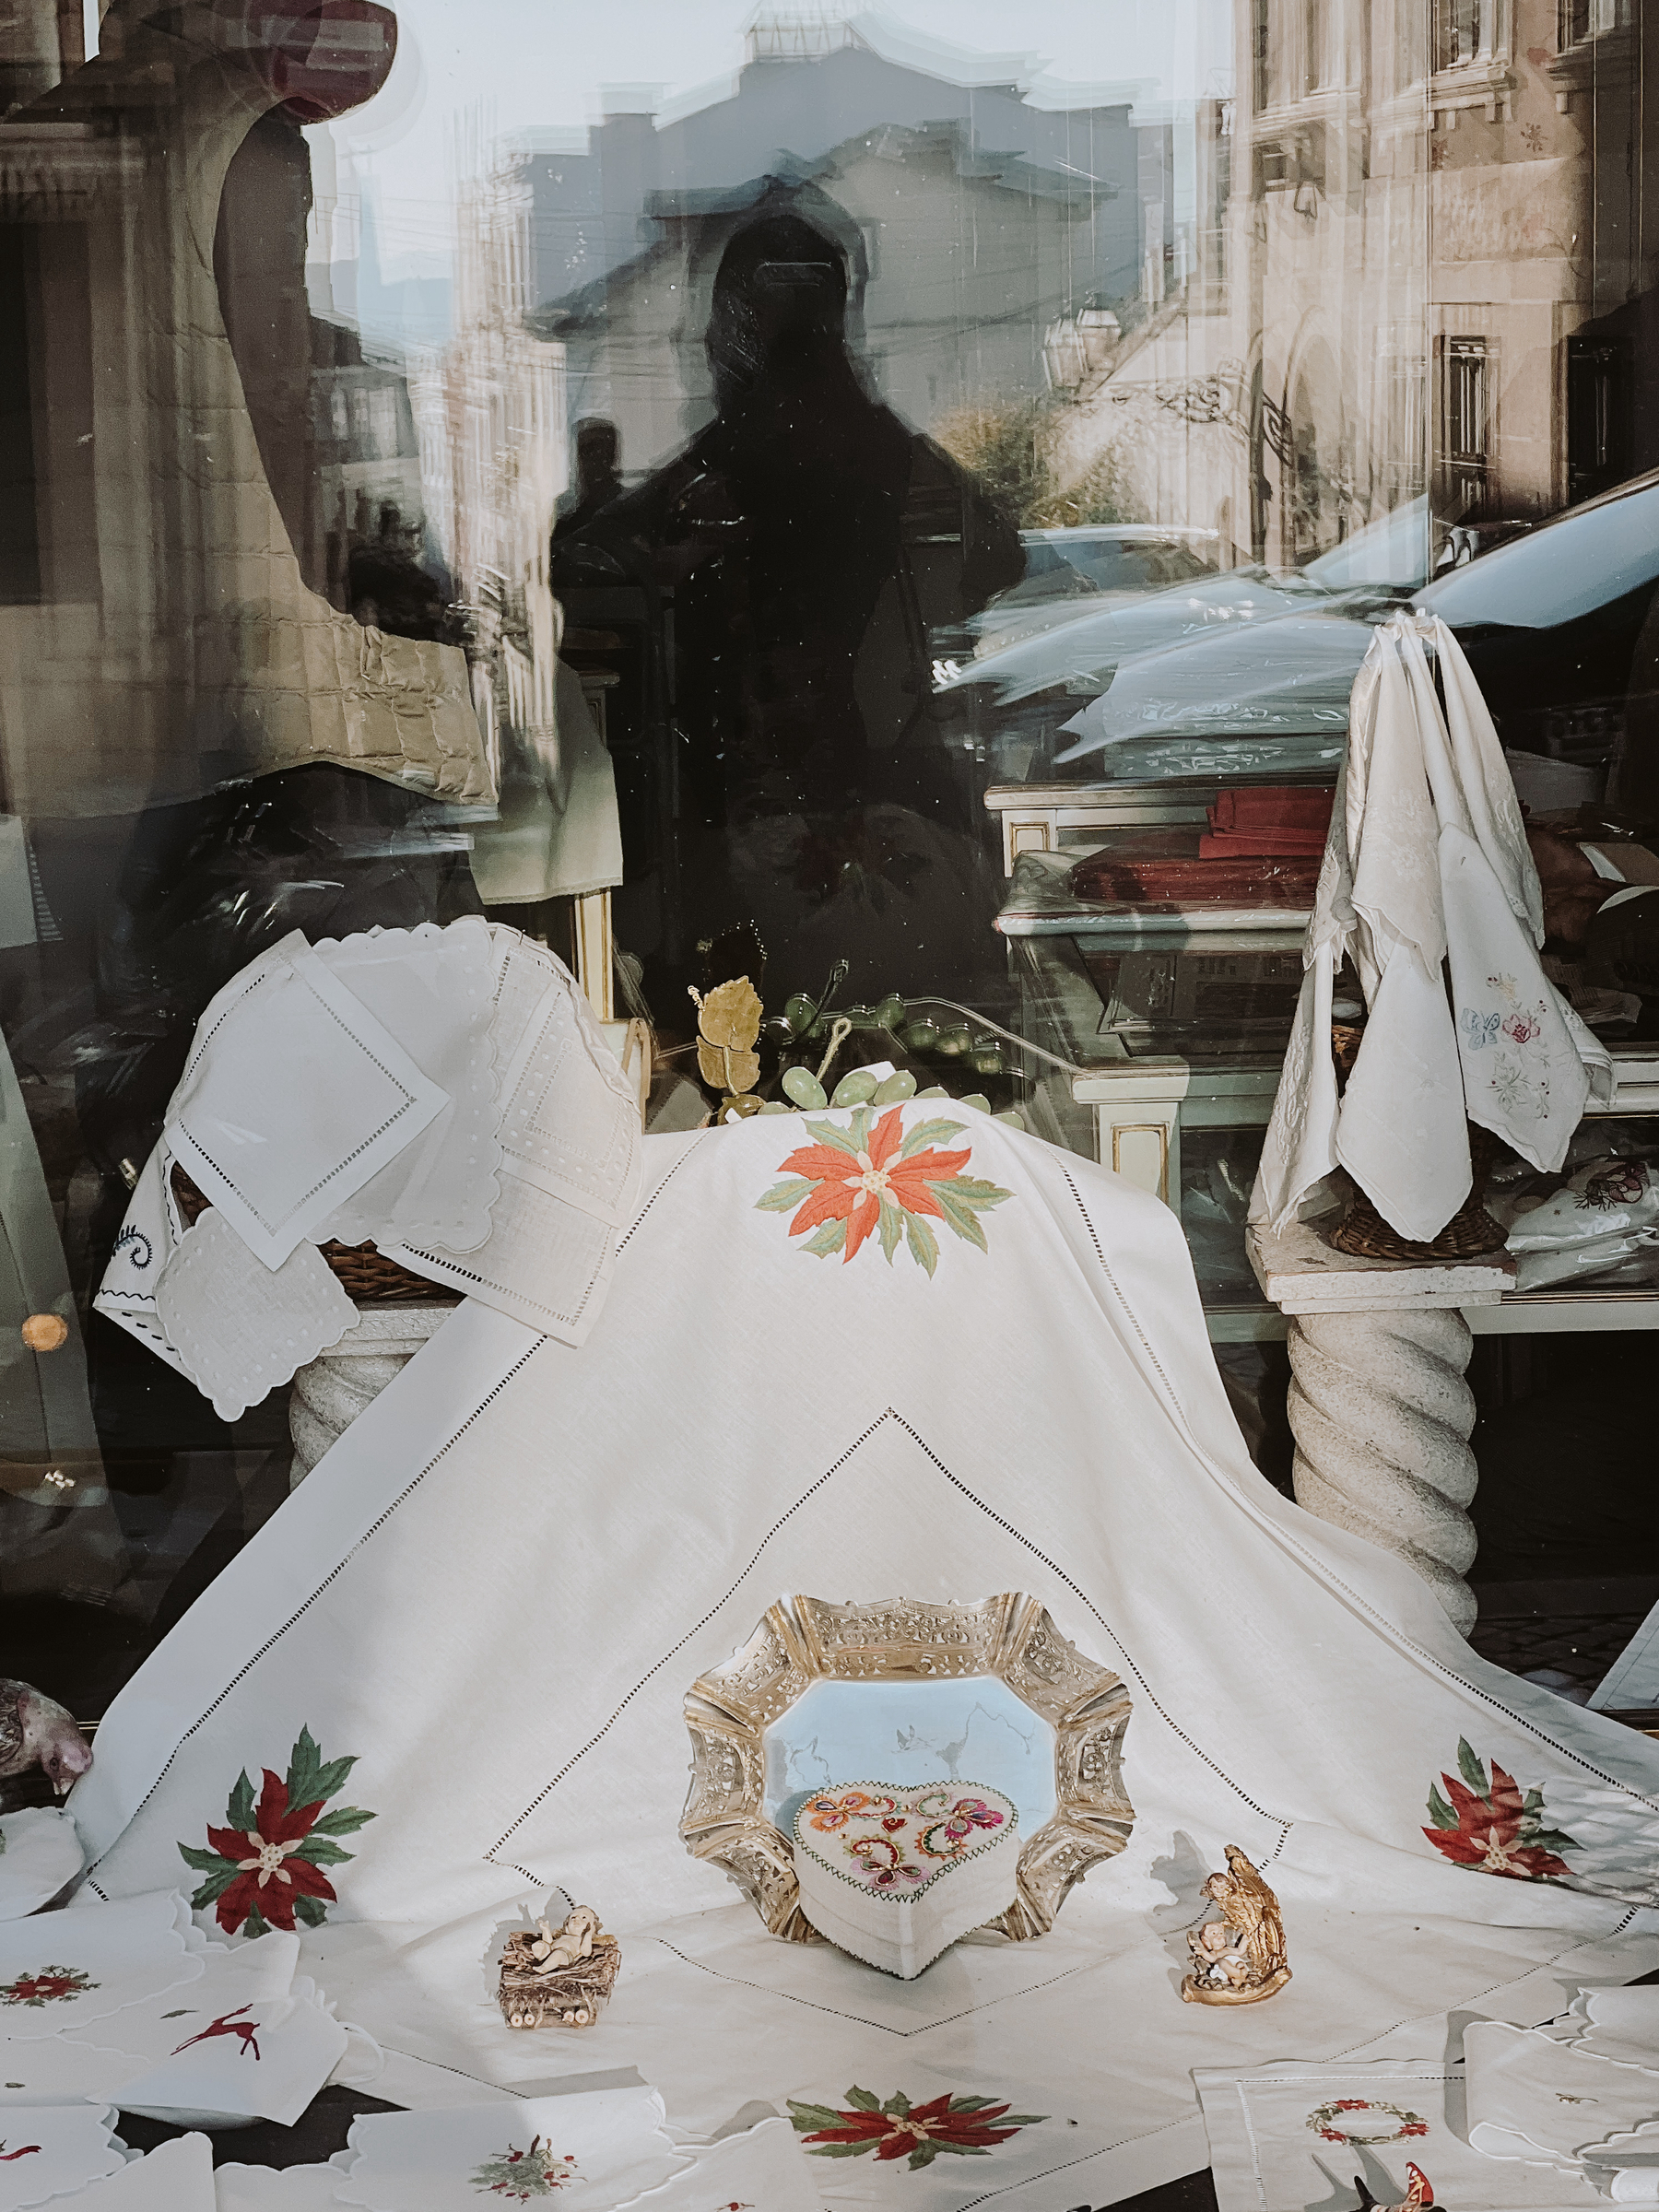 A shop window display featuring decorative table linens with embroidered floral designs, alongside a variety of small decorative items. A person&rsquo;s silhouette is reflected in the glass.